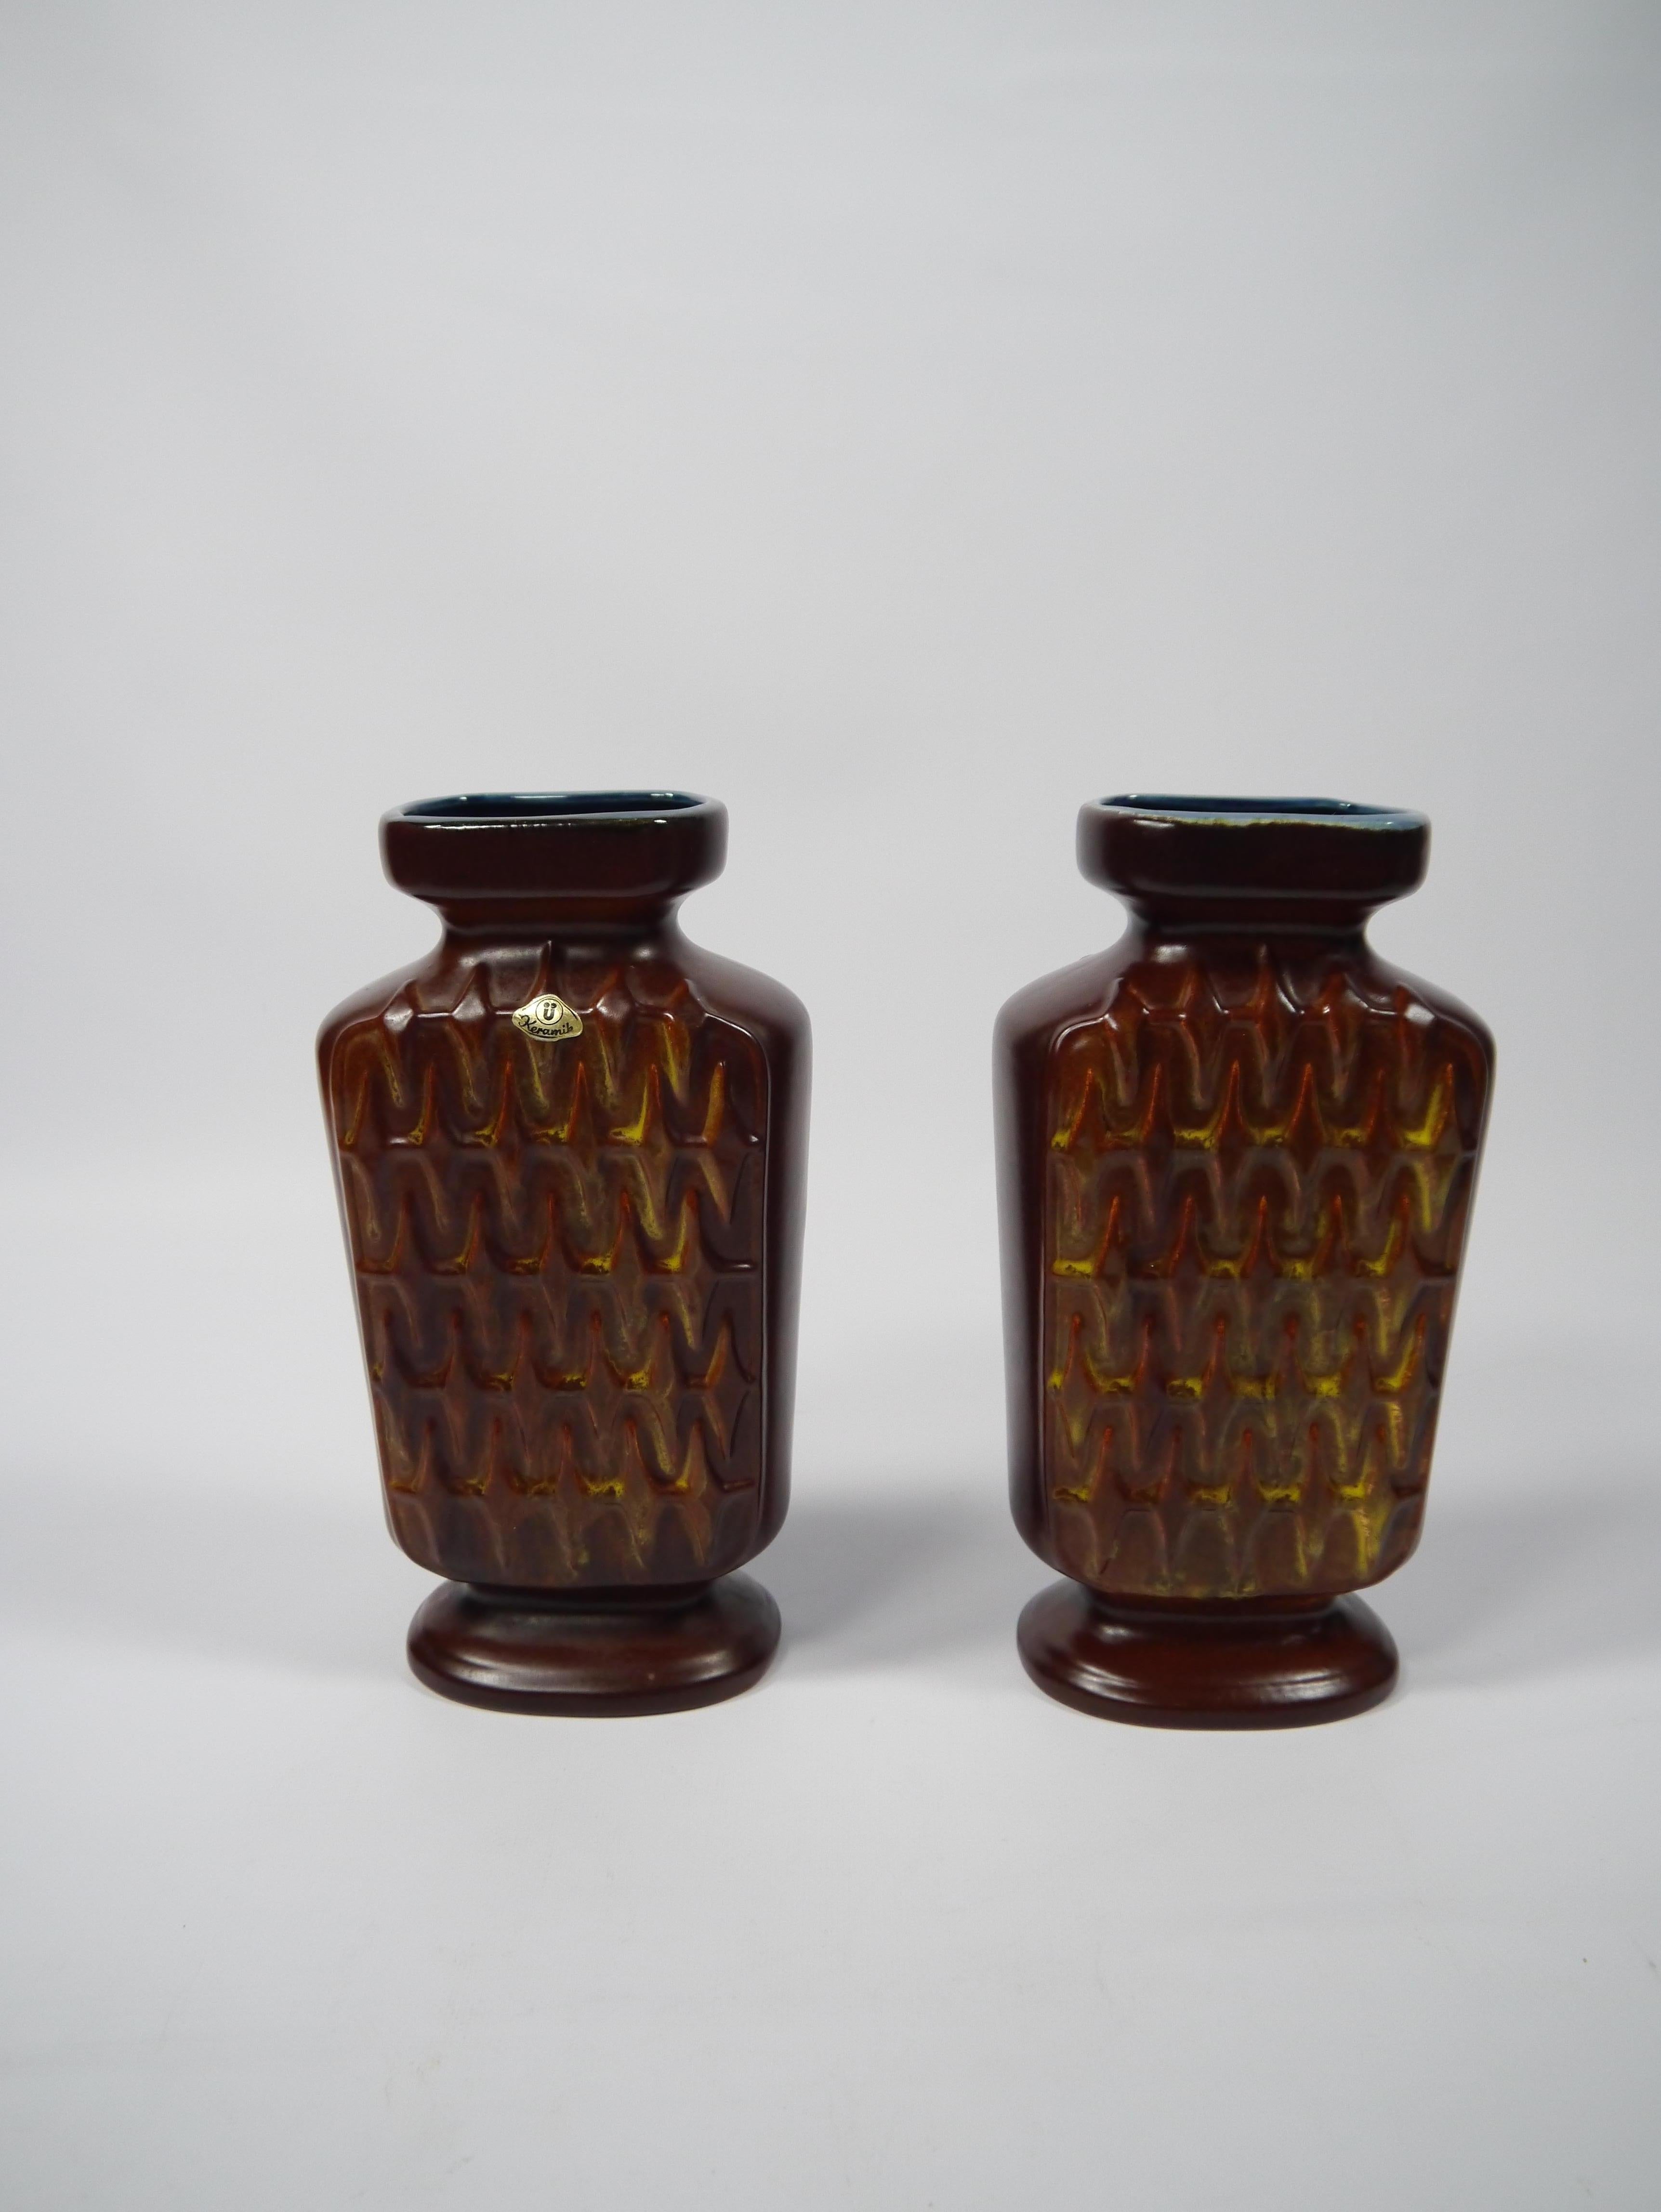 Pair of glazed ceramic vases made by Üebelacker Keramik in West Germany 1950s. Clean and distinct wave pattern, brown-reddish glaze with yellow/red/orange hues reminiscent of flames within the pattern and contrasting blue glaze to top and inside.